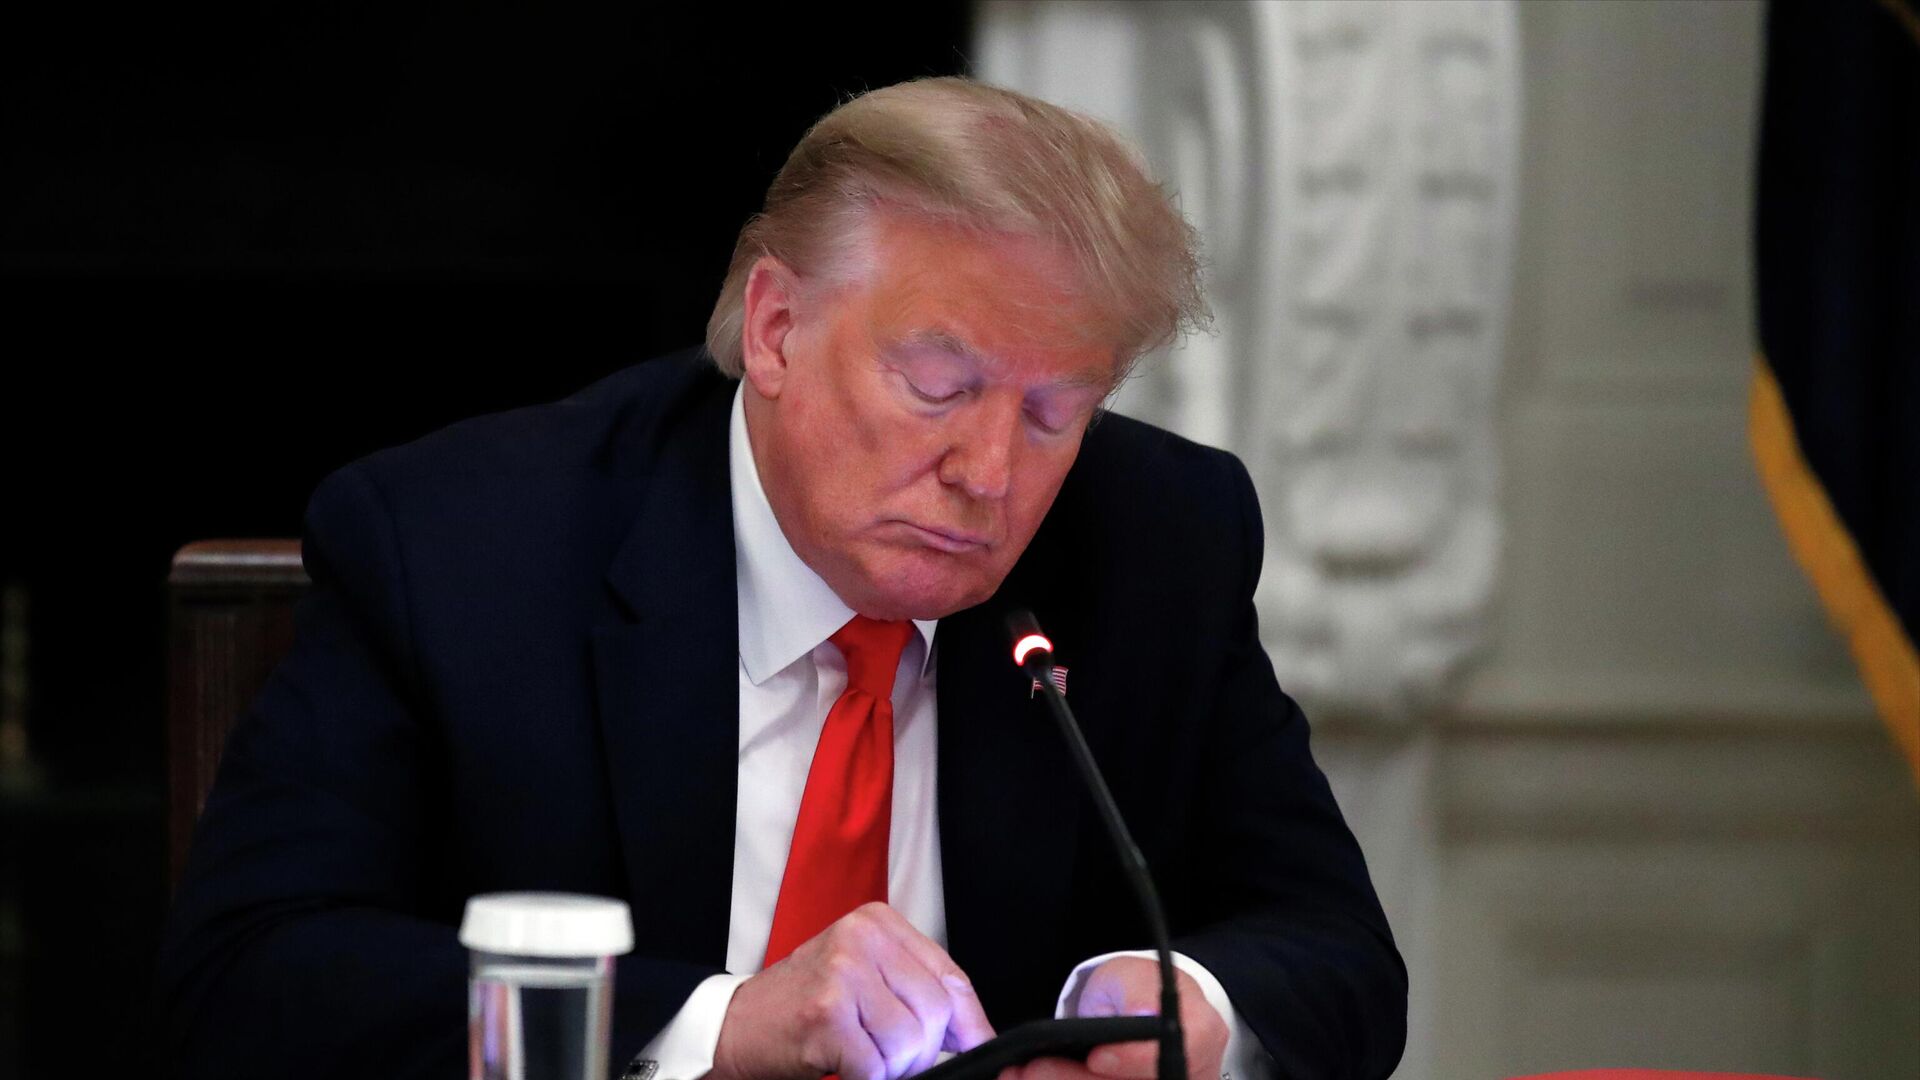 President Donald Trump looks at his phone during a roundtable with governors on the reopening of America's small businesses, in the State Dining Room of the White House in Washington, June 18, 2020 - Sputnik International, 1920, 05.04.2023